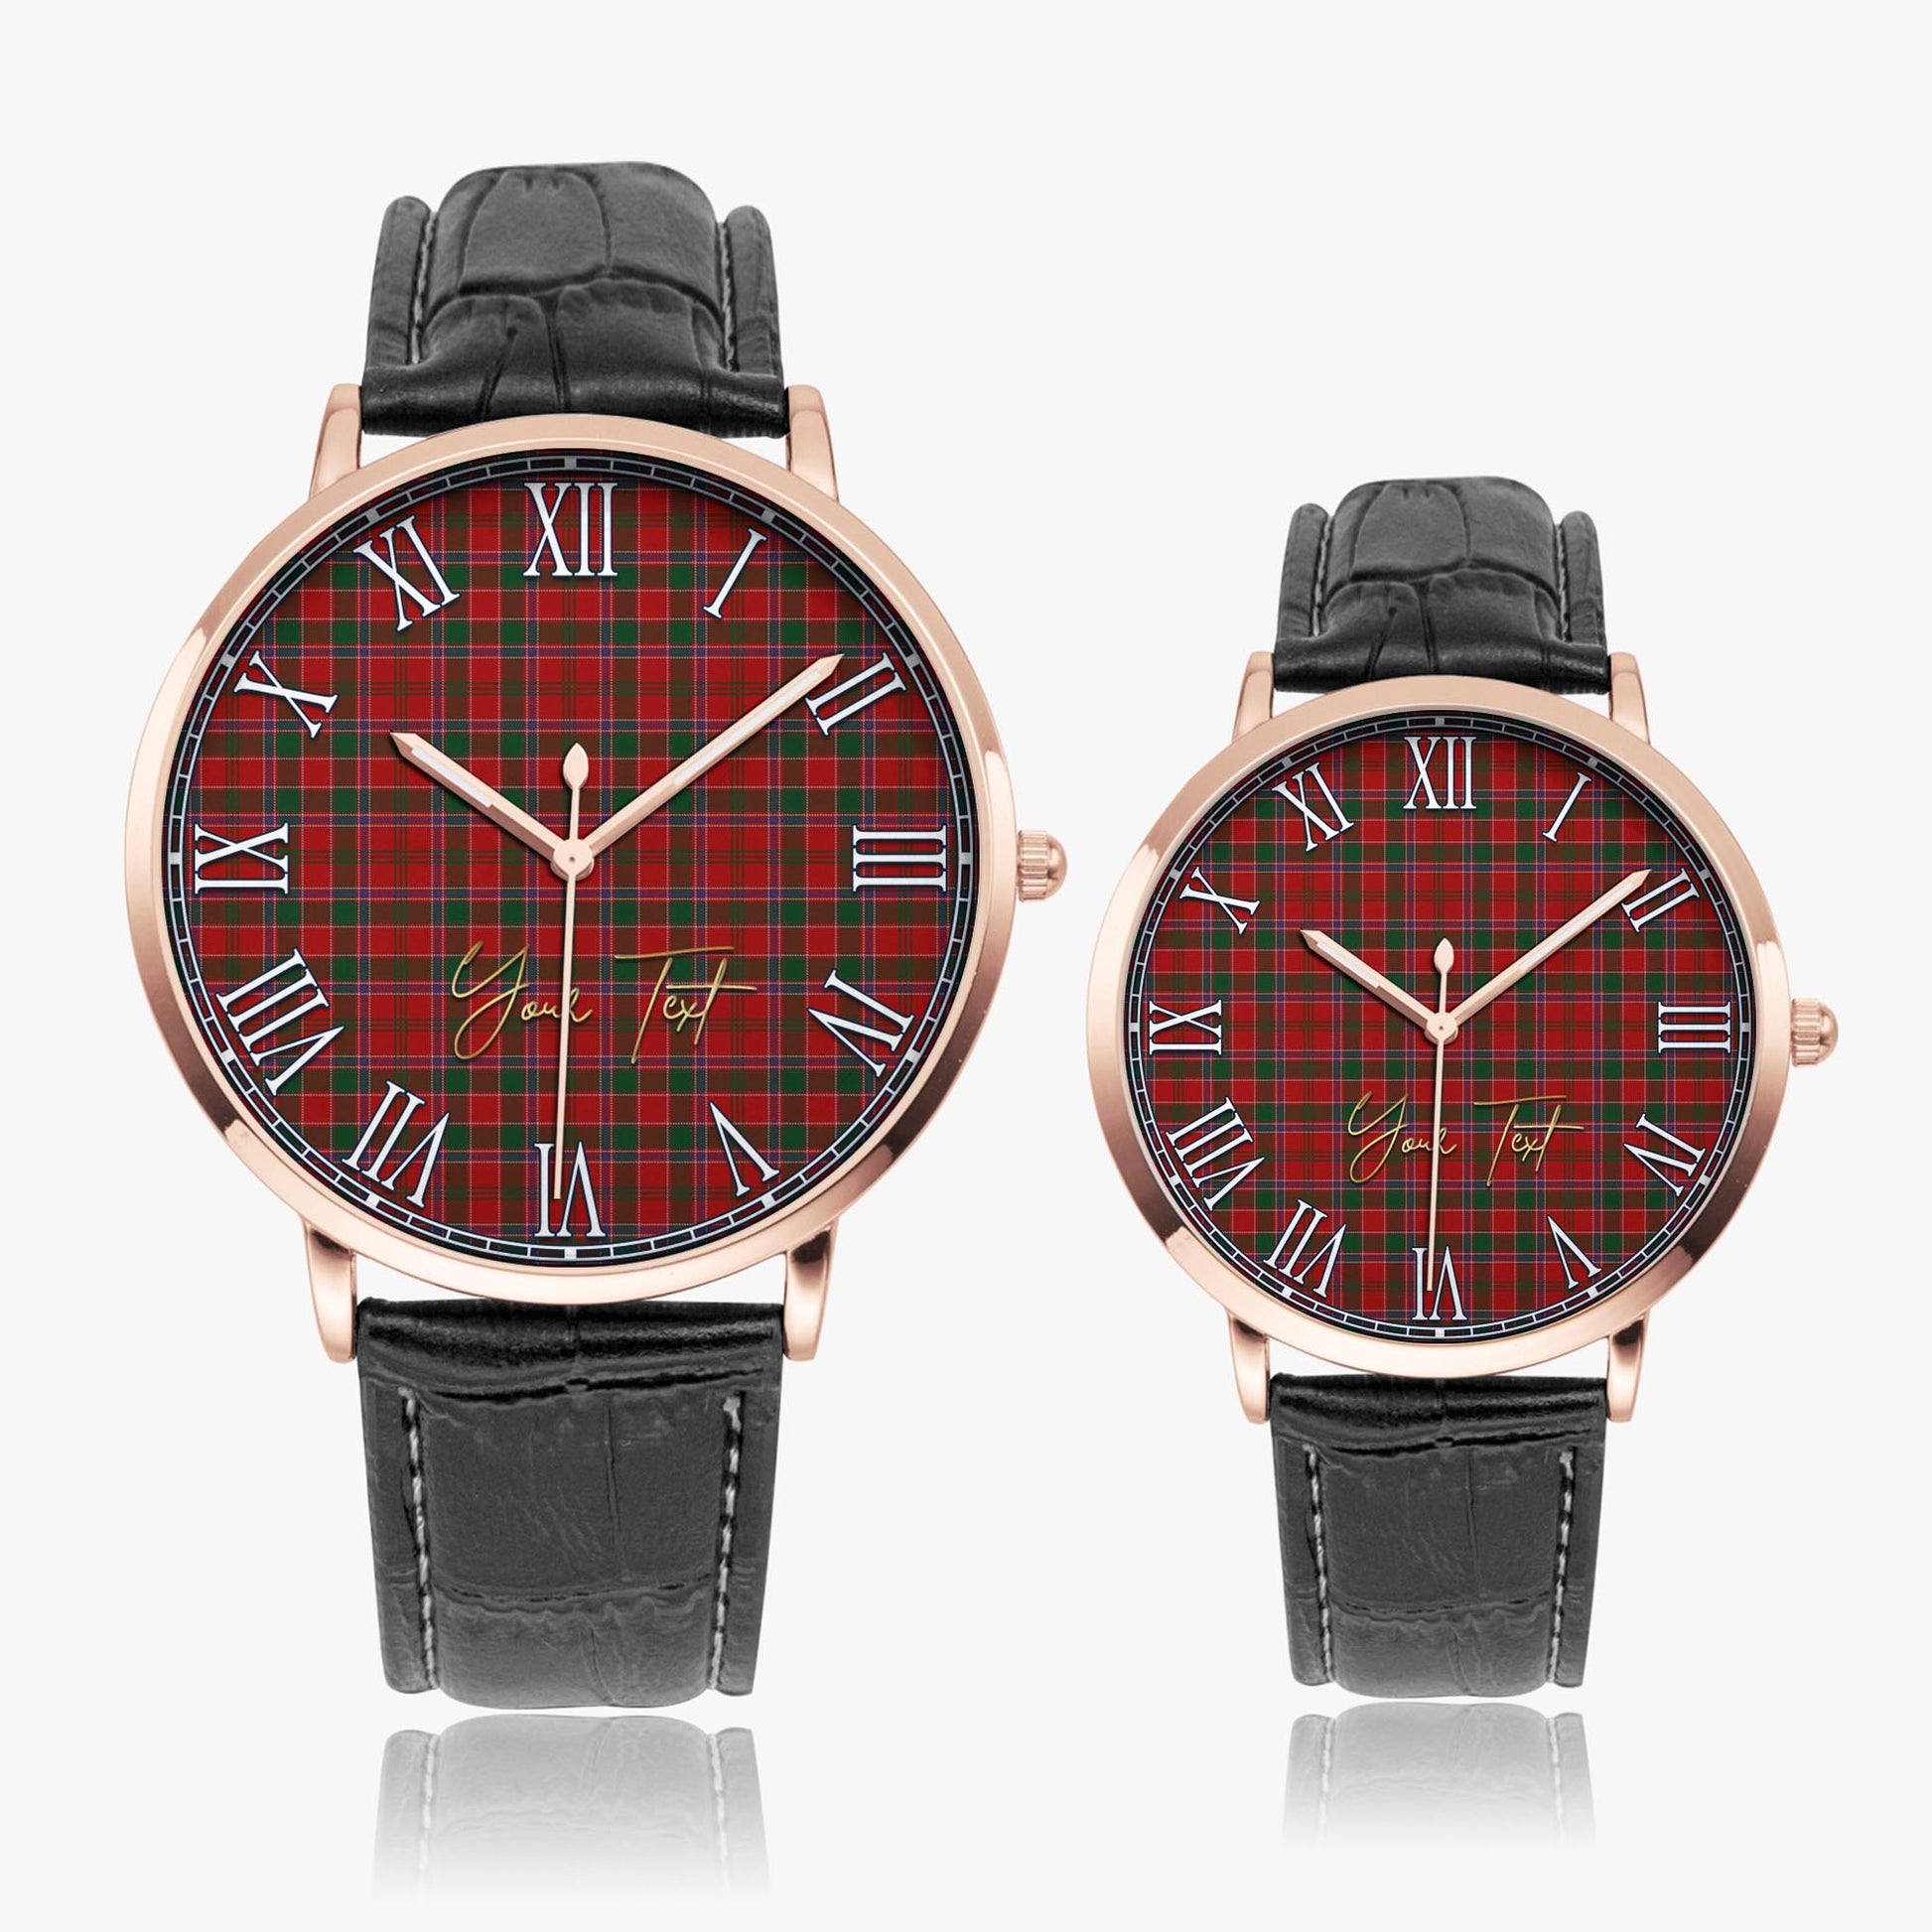 Dalzell (Dalziel) Tartan Personalized Your Text Leather Trap Quartz Watch Ultra Thin Rose Gold Case With Black Leather Strap - Tartanvibesclothing